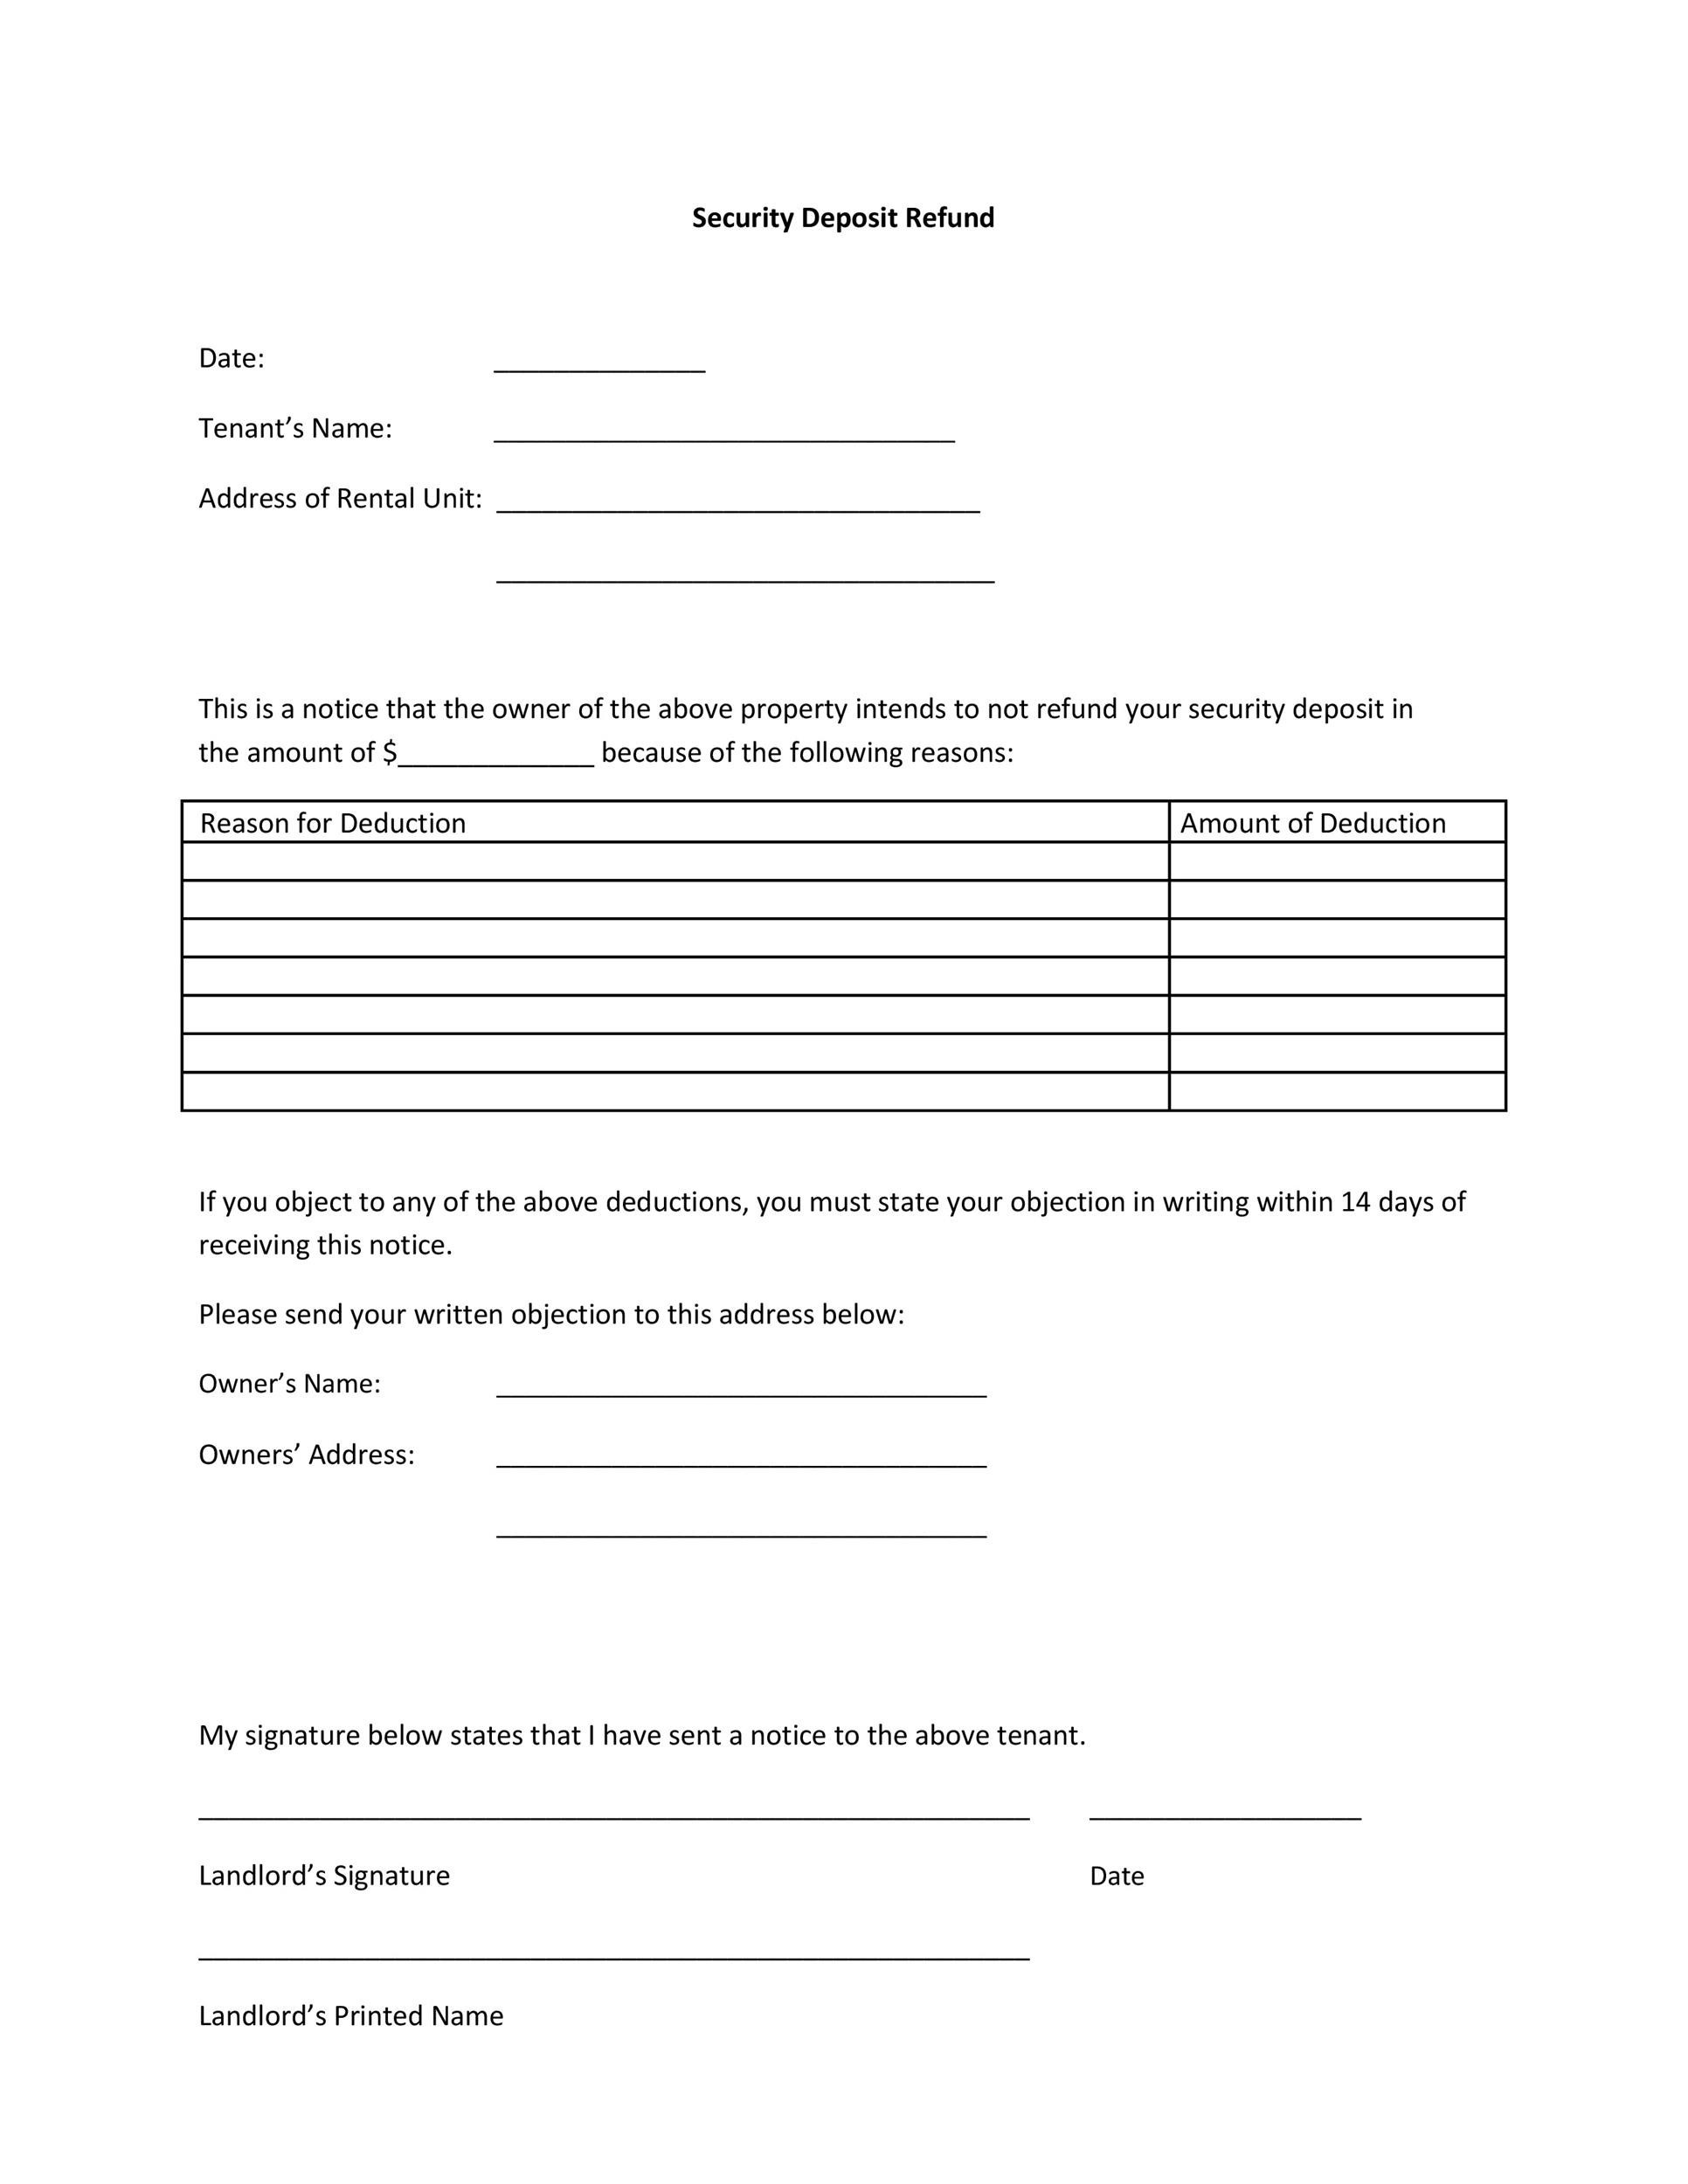 Security Deposit Refund Letter Template from templatelab.com